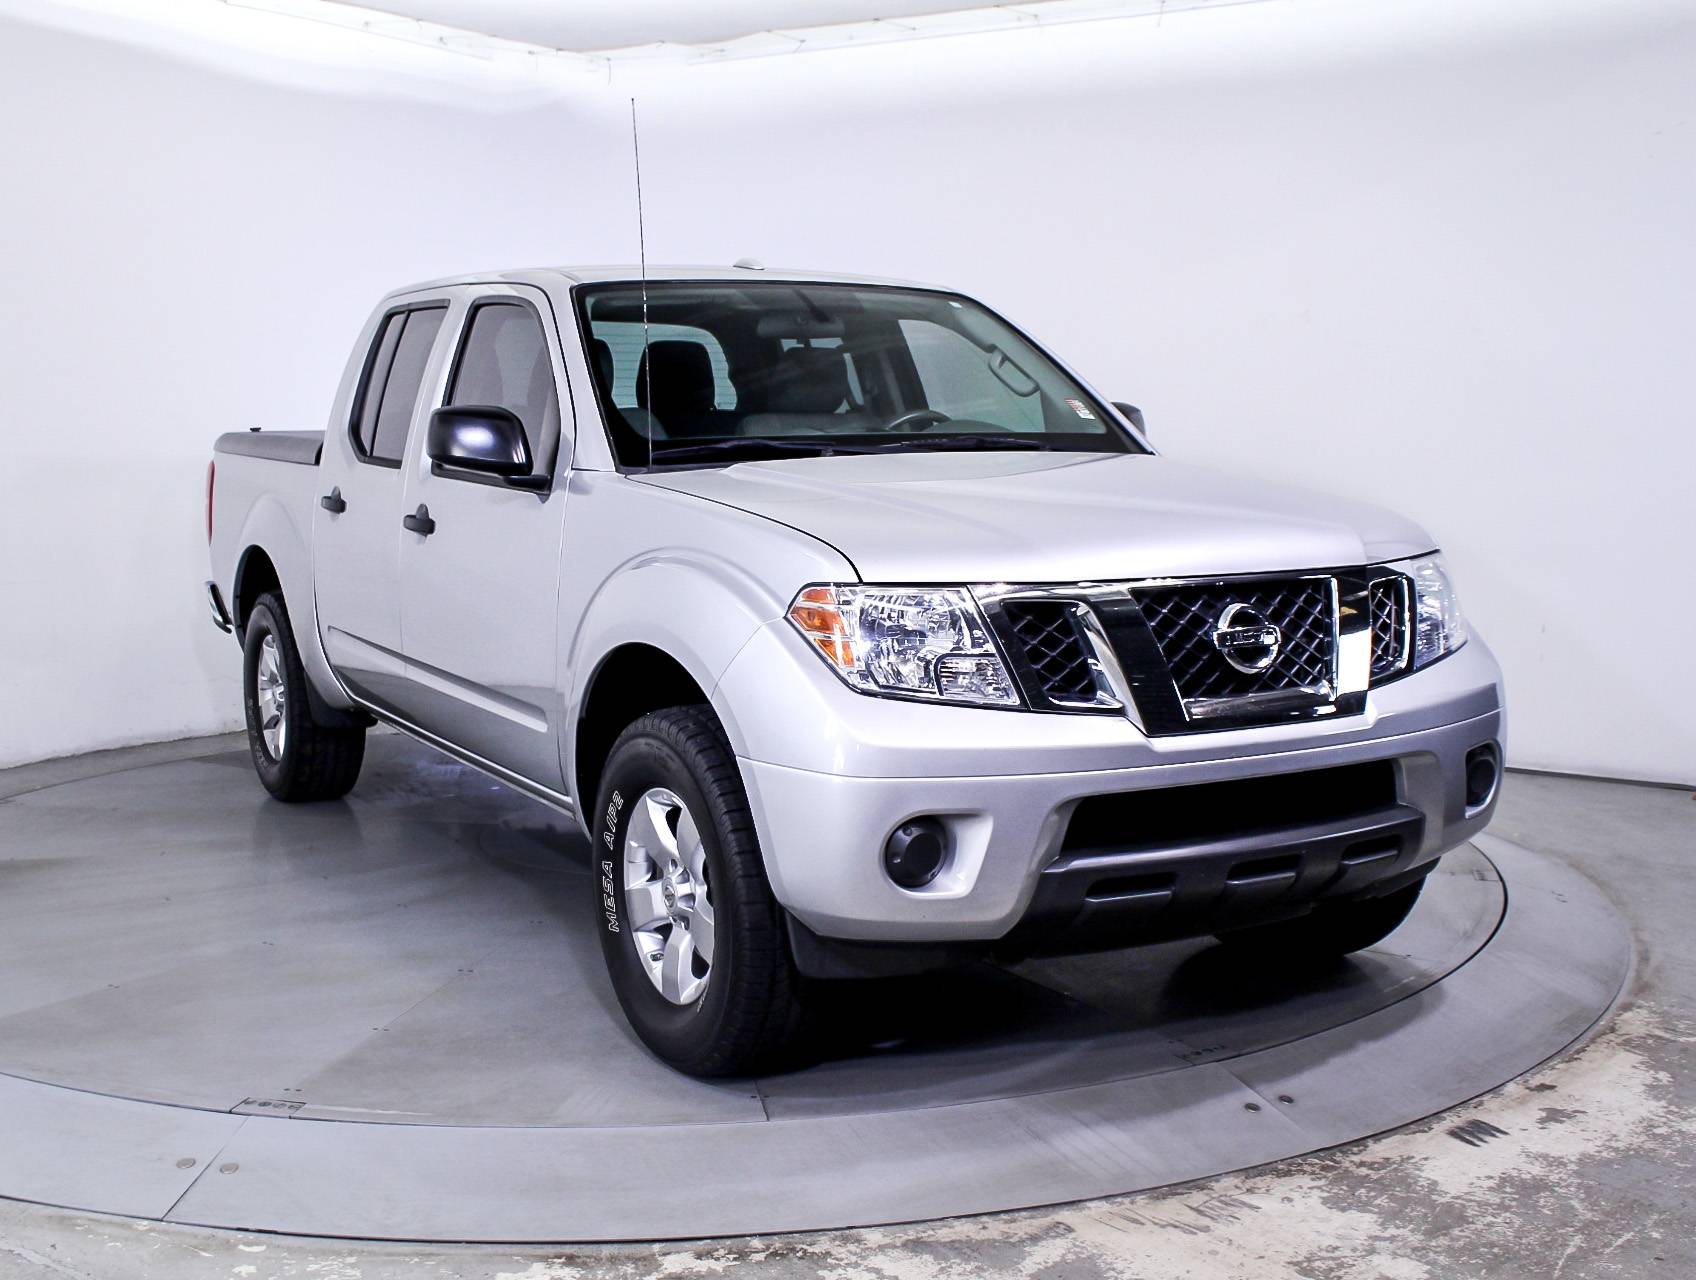 Florida Fine Cars - Used NISSAN FRONTIER 2013 MIAMI Sv 4wd